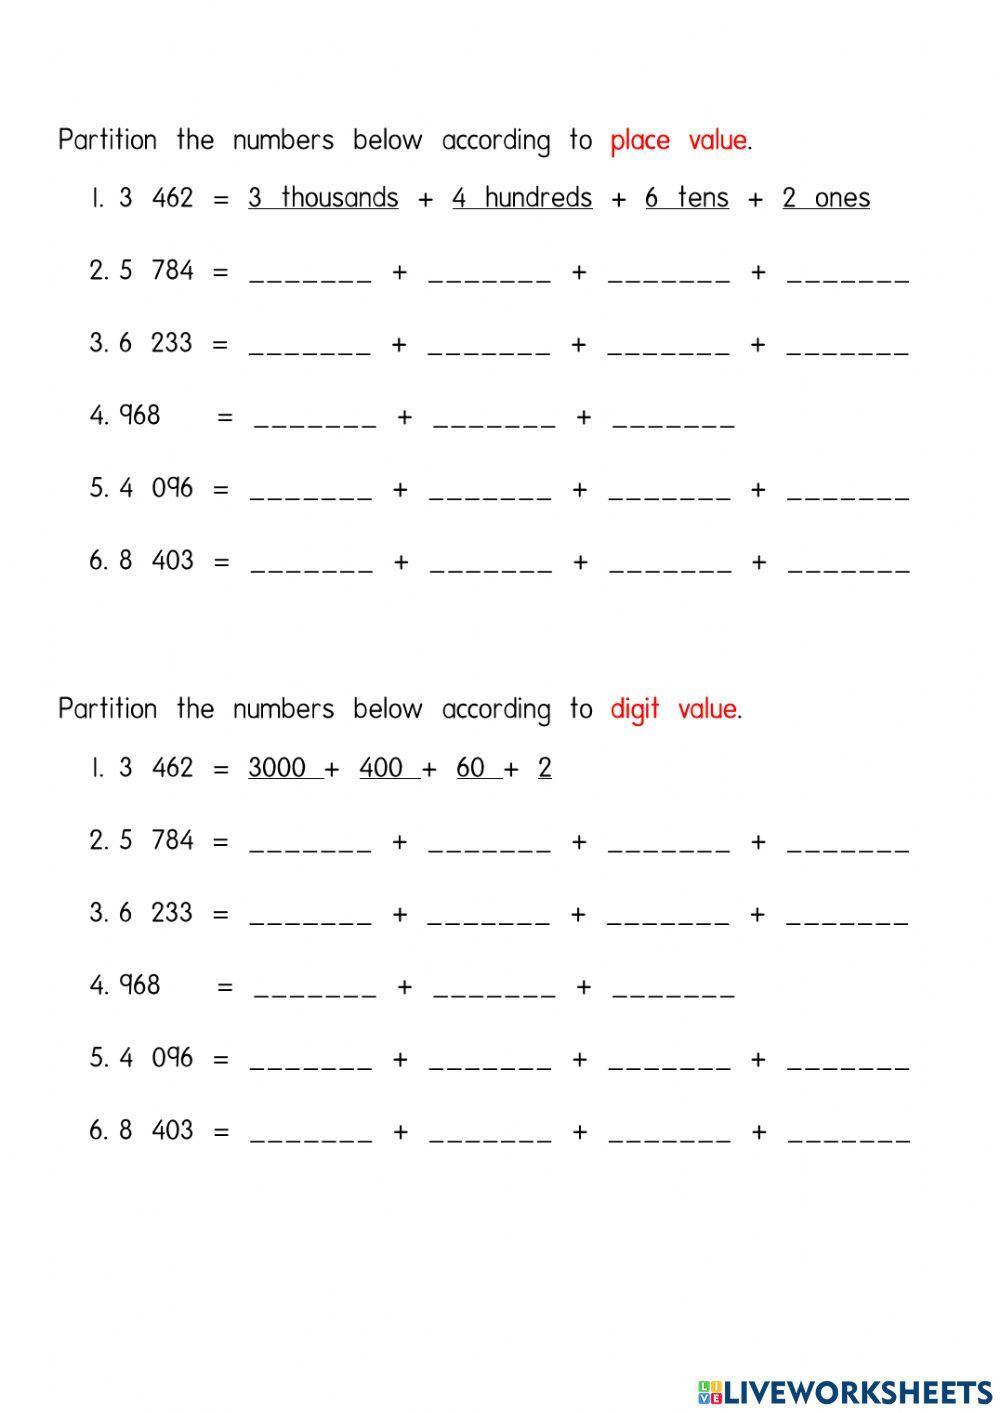 Number Partitioning